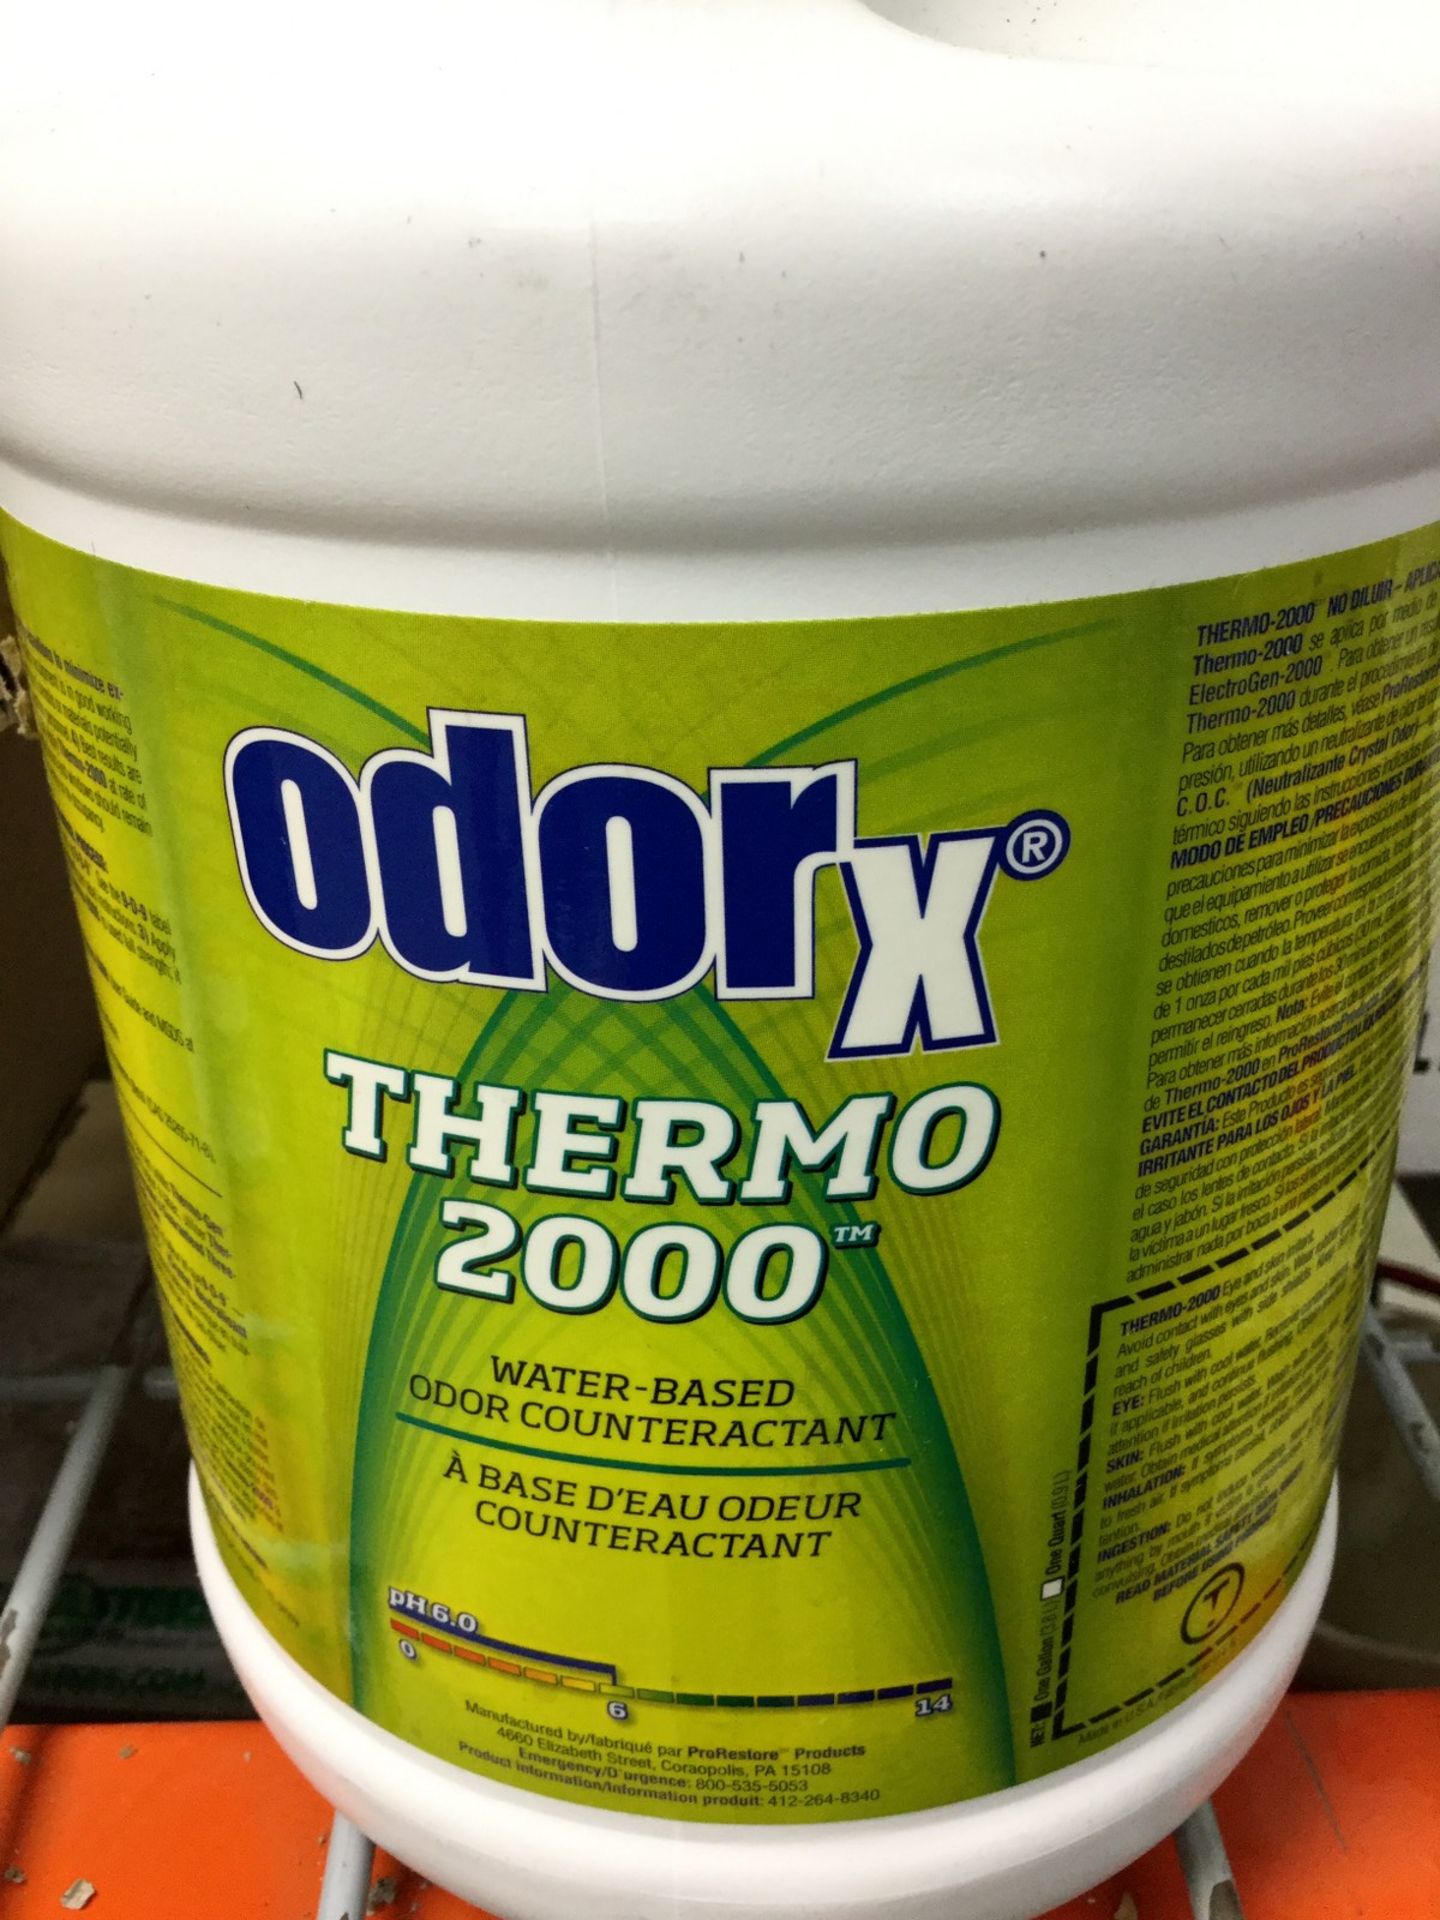 4 X ODORX - THERMO 2000 WATER BASED ODOR COUNTERACTANT 3.8L - Image 2 of 2